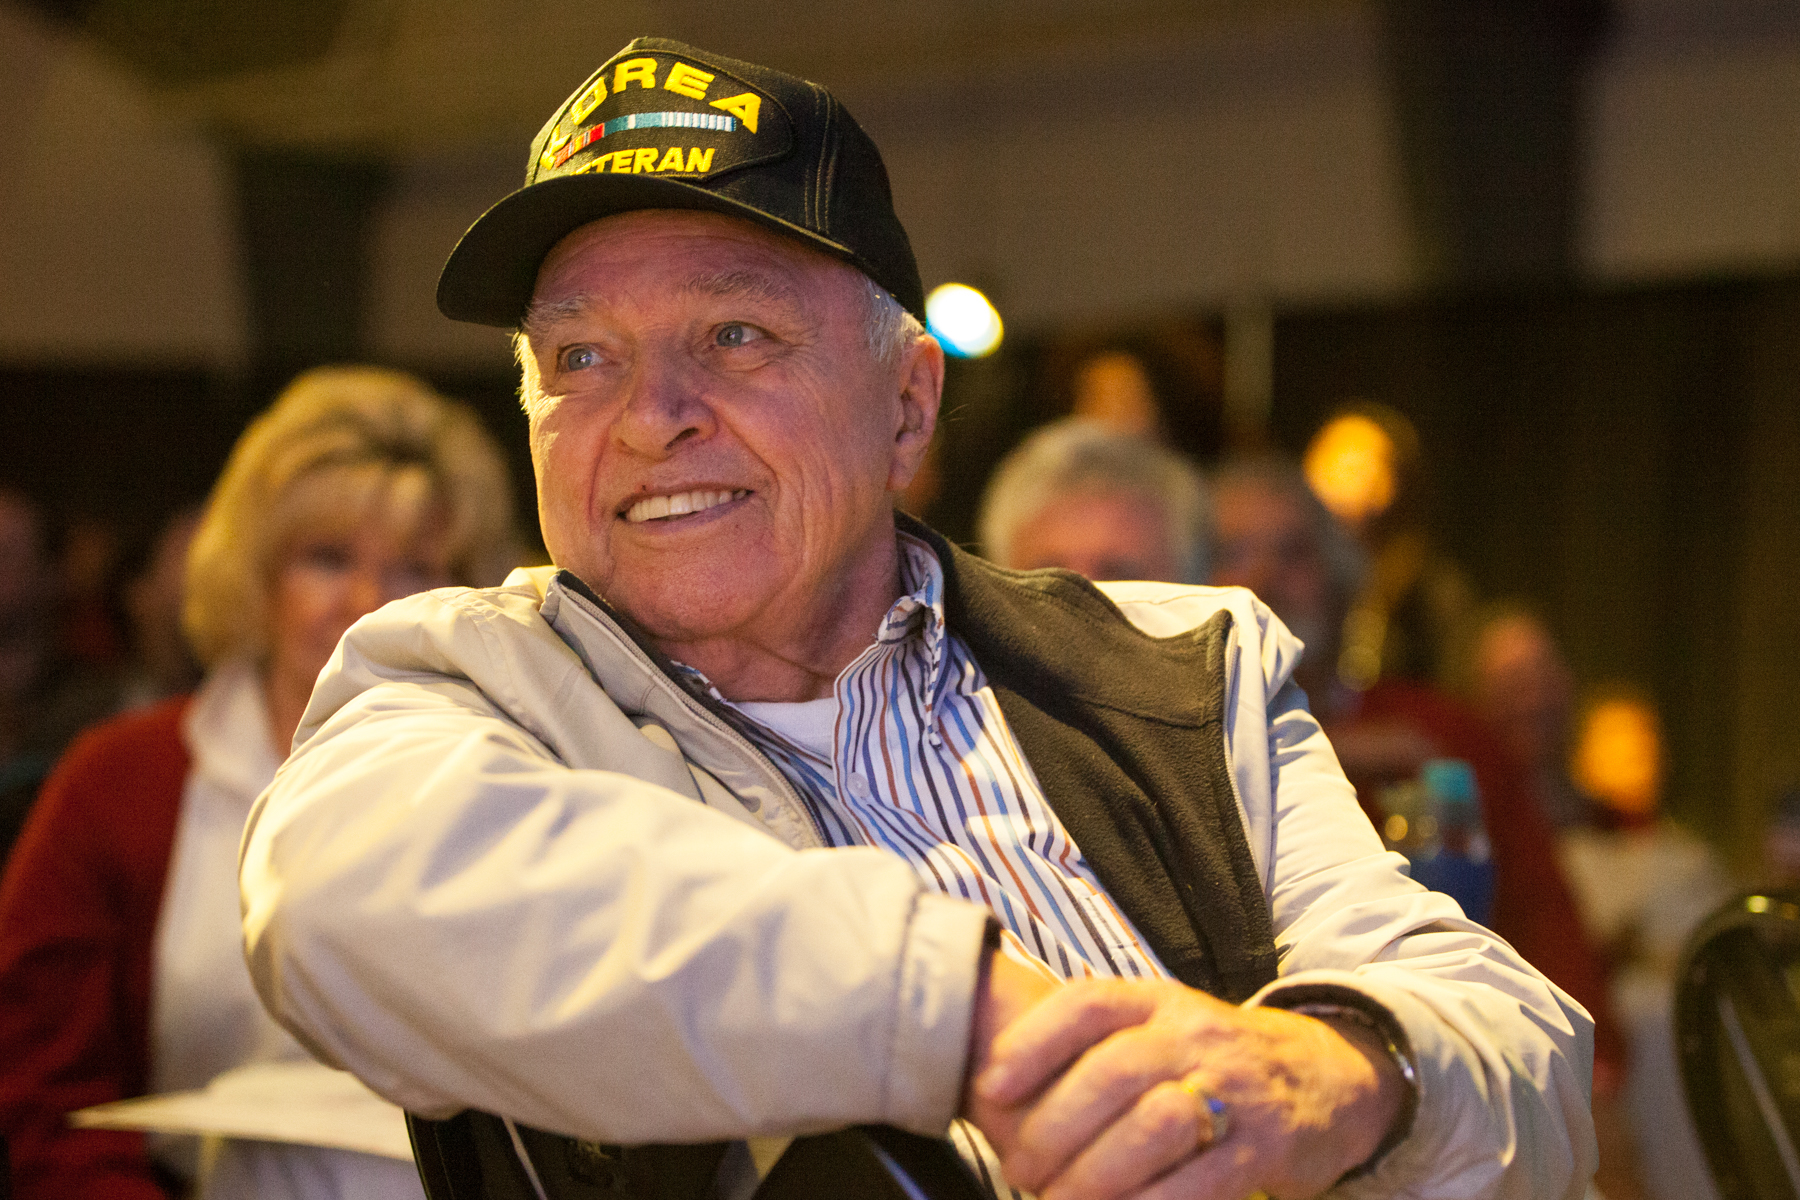 Braintree, MA – Nov. 8, 2016 – Martin Beatty, 82, of Weymouth, Massachusetts, reacts as United States presidential election results are reported on Fox News during the Massachusetts Trump-Pence Campaign victory party. Trump supporters gathered at the F1 Boston race track to cheer on their nominee as he was elected 45th president of the United States.